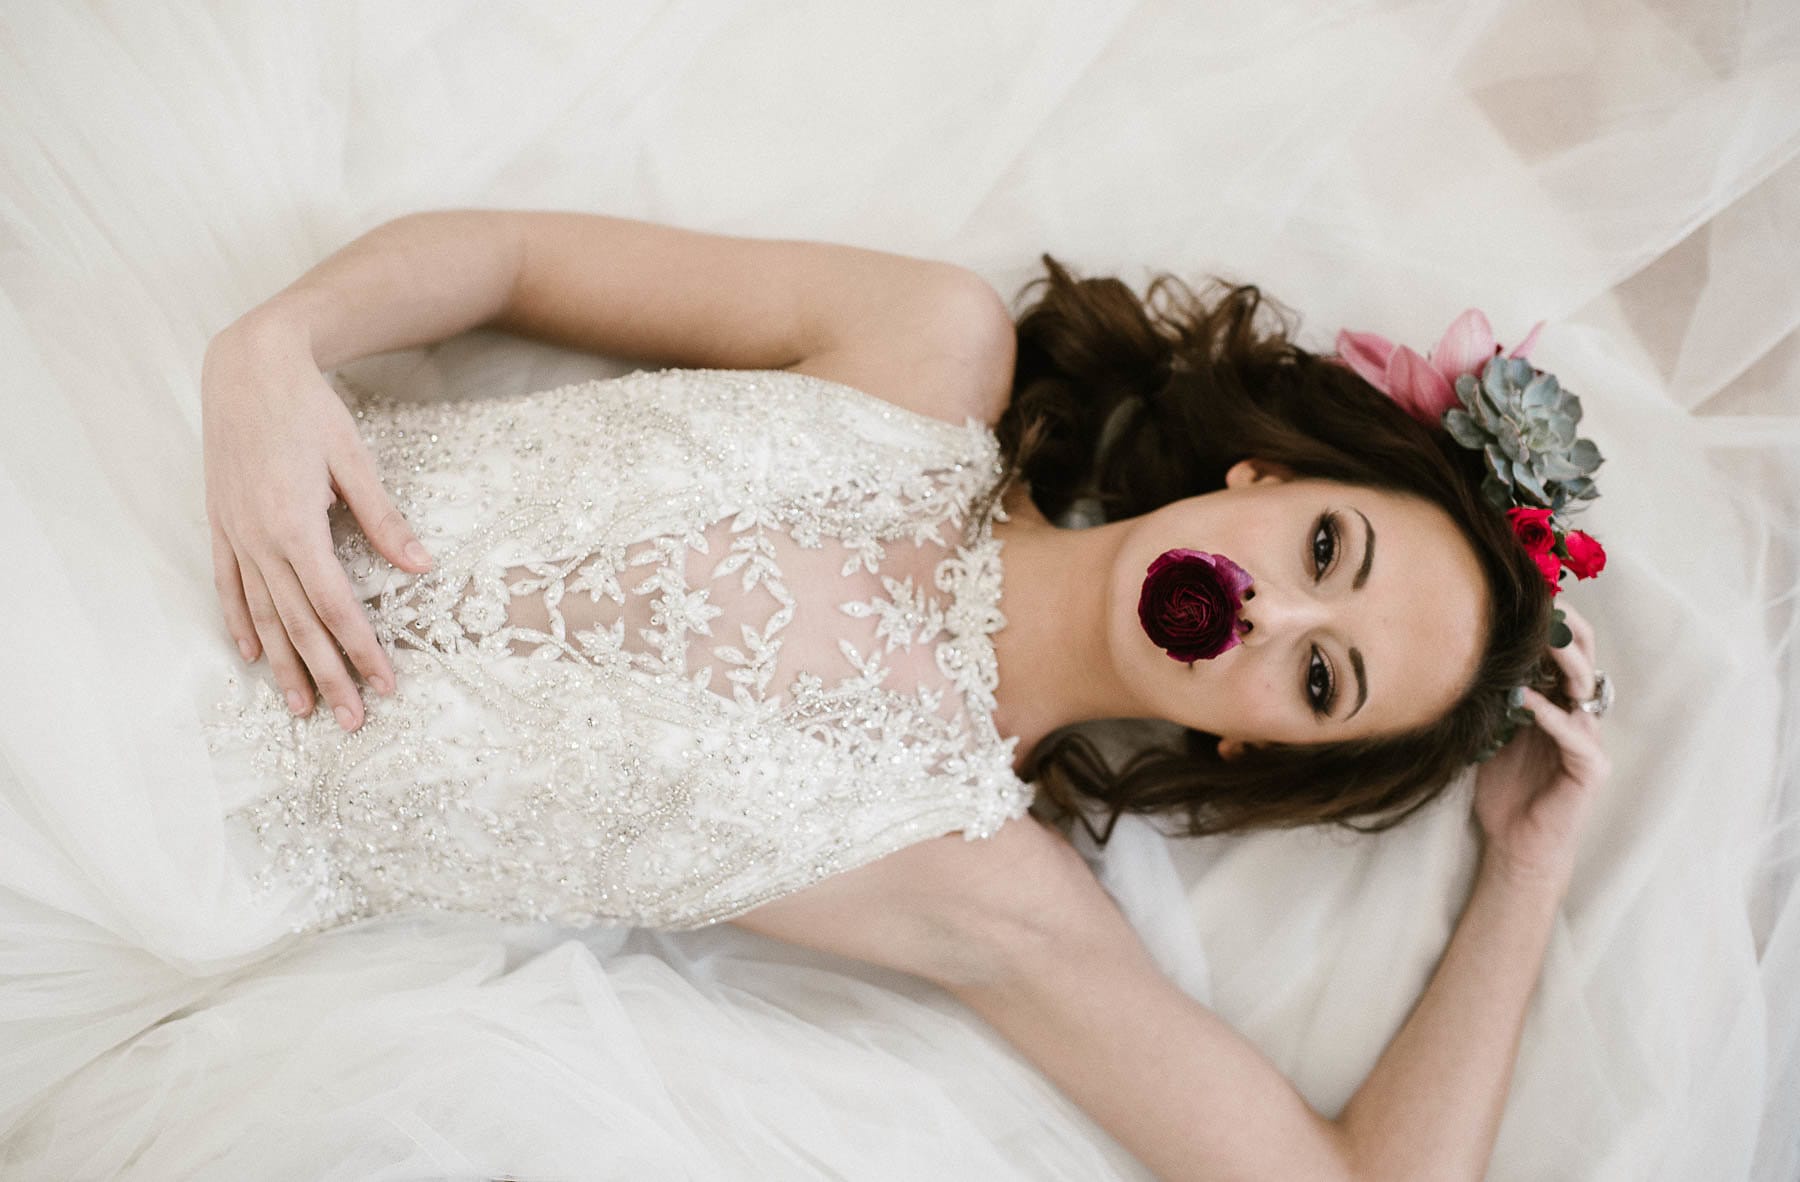 Princess Wedding Dress in Moody Styled Shoot With Jewel-toned Florals - Fall in Love with Gowns for the Romantic, Edgy, and Elegant Bride